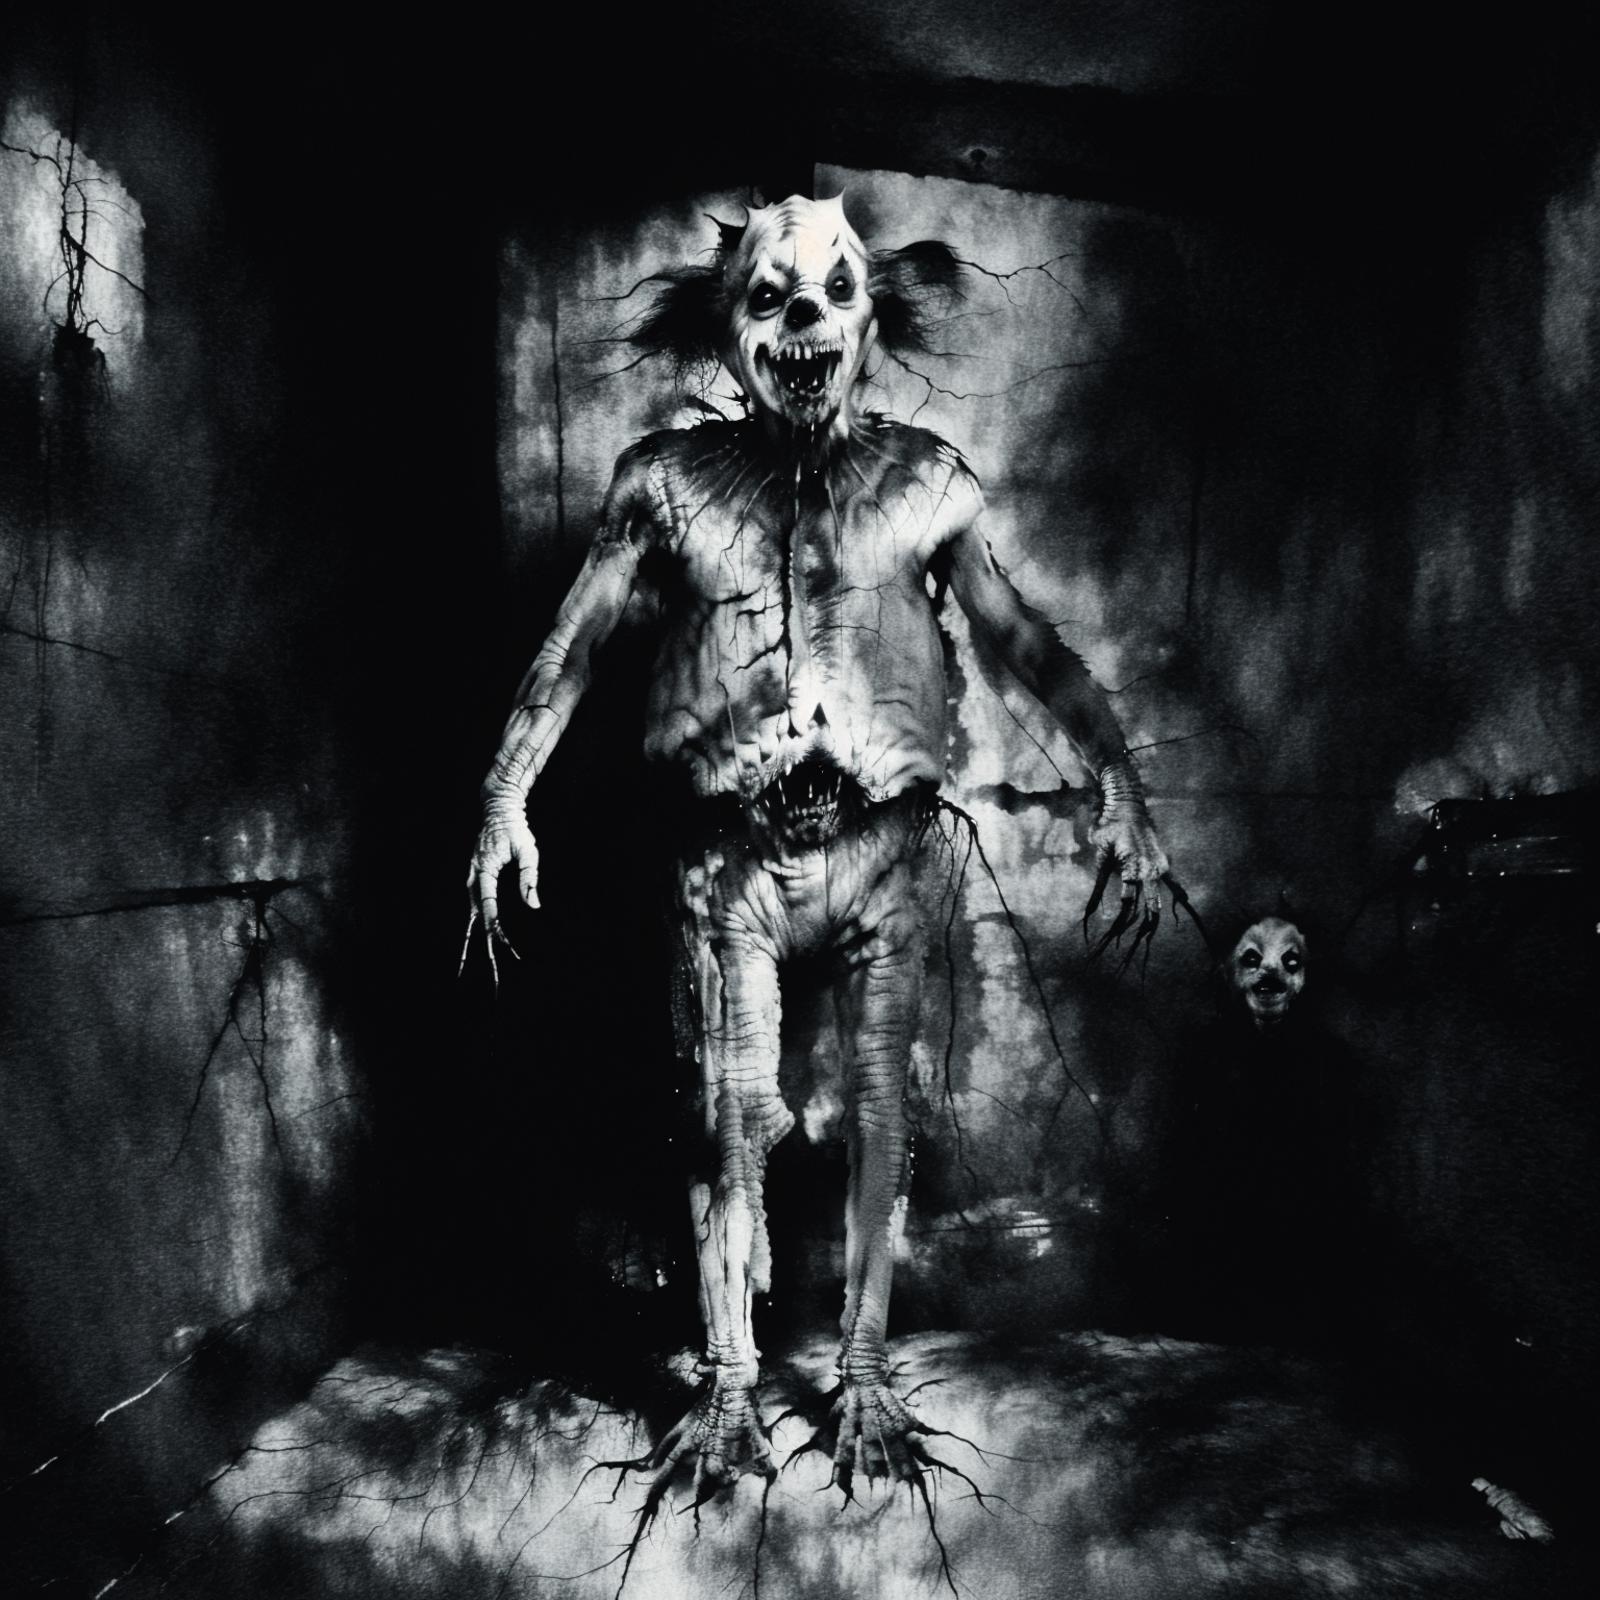 Stephen Gammell (artist) Scary Stories to Tell in the Dark image by Crow_Mauler